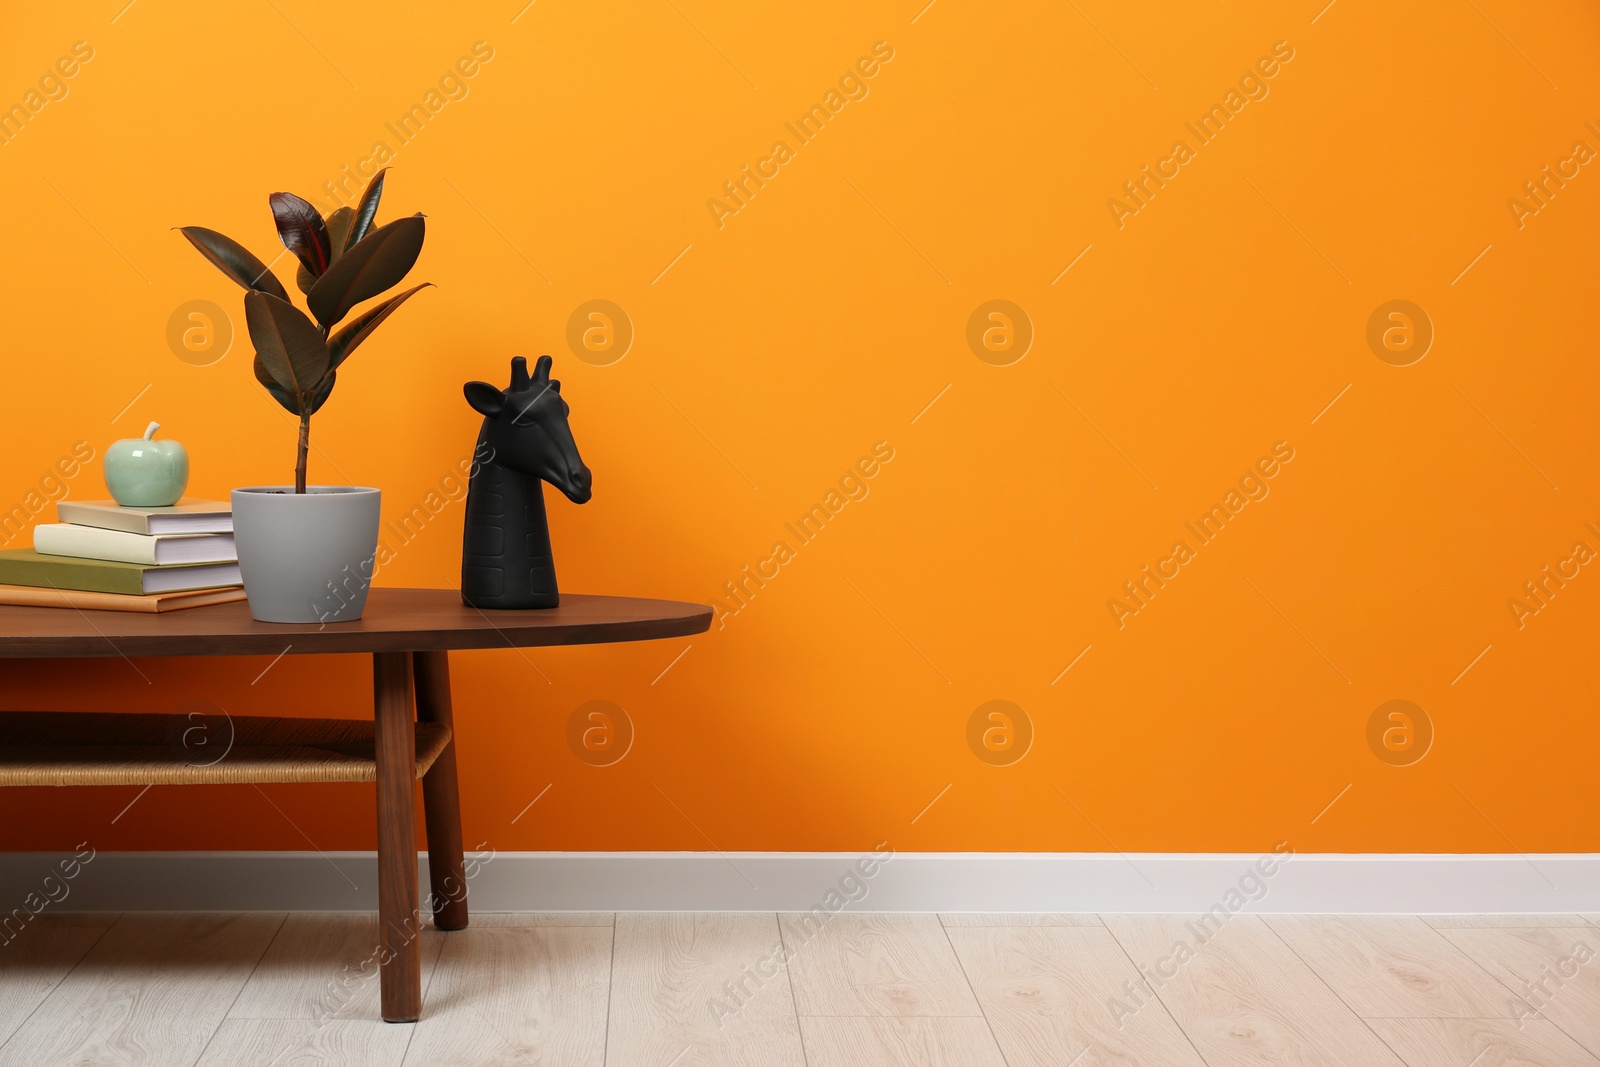 Photo of Wooden coffee table with different decor near orange wall indoors, space for text. Stylish interior design